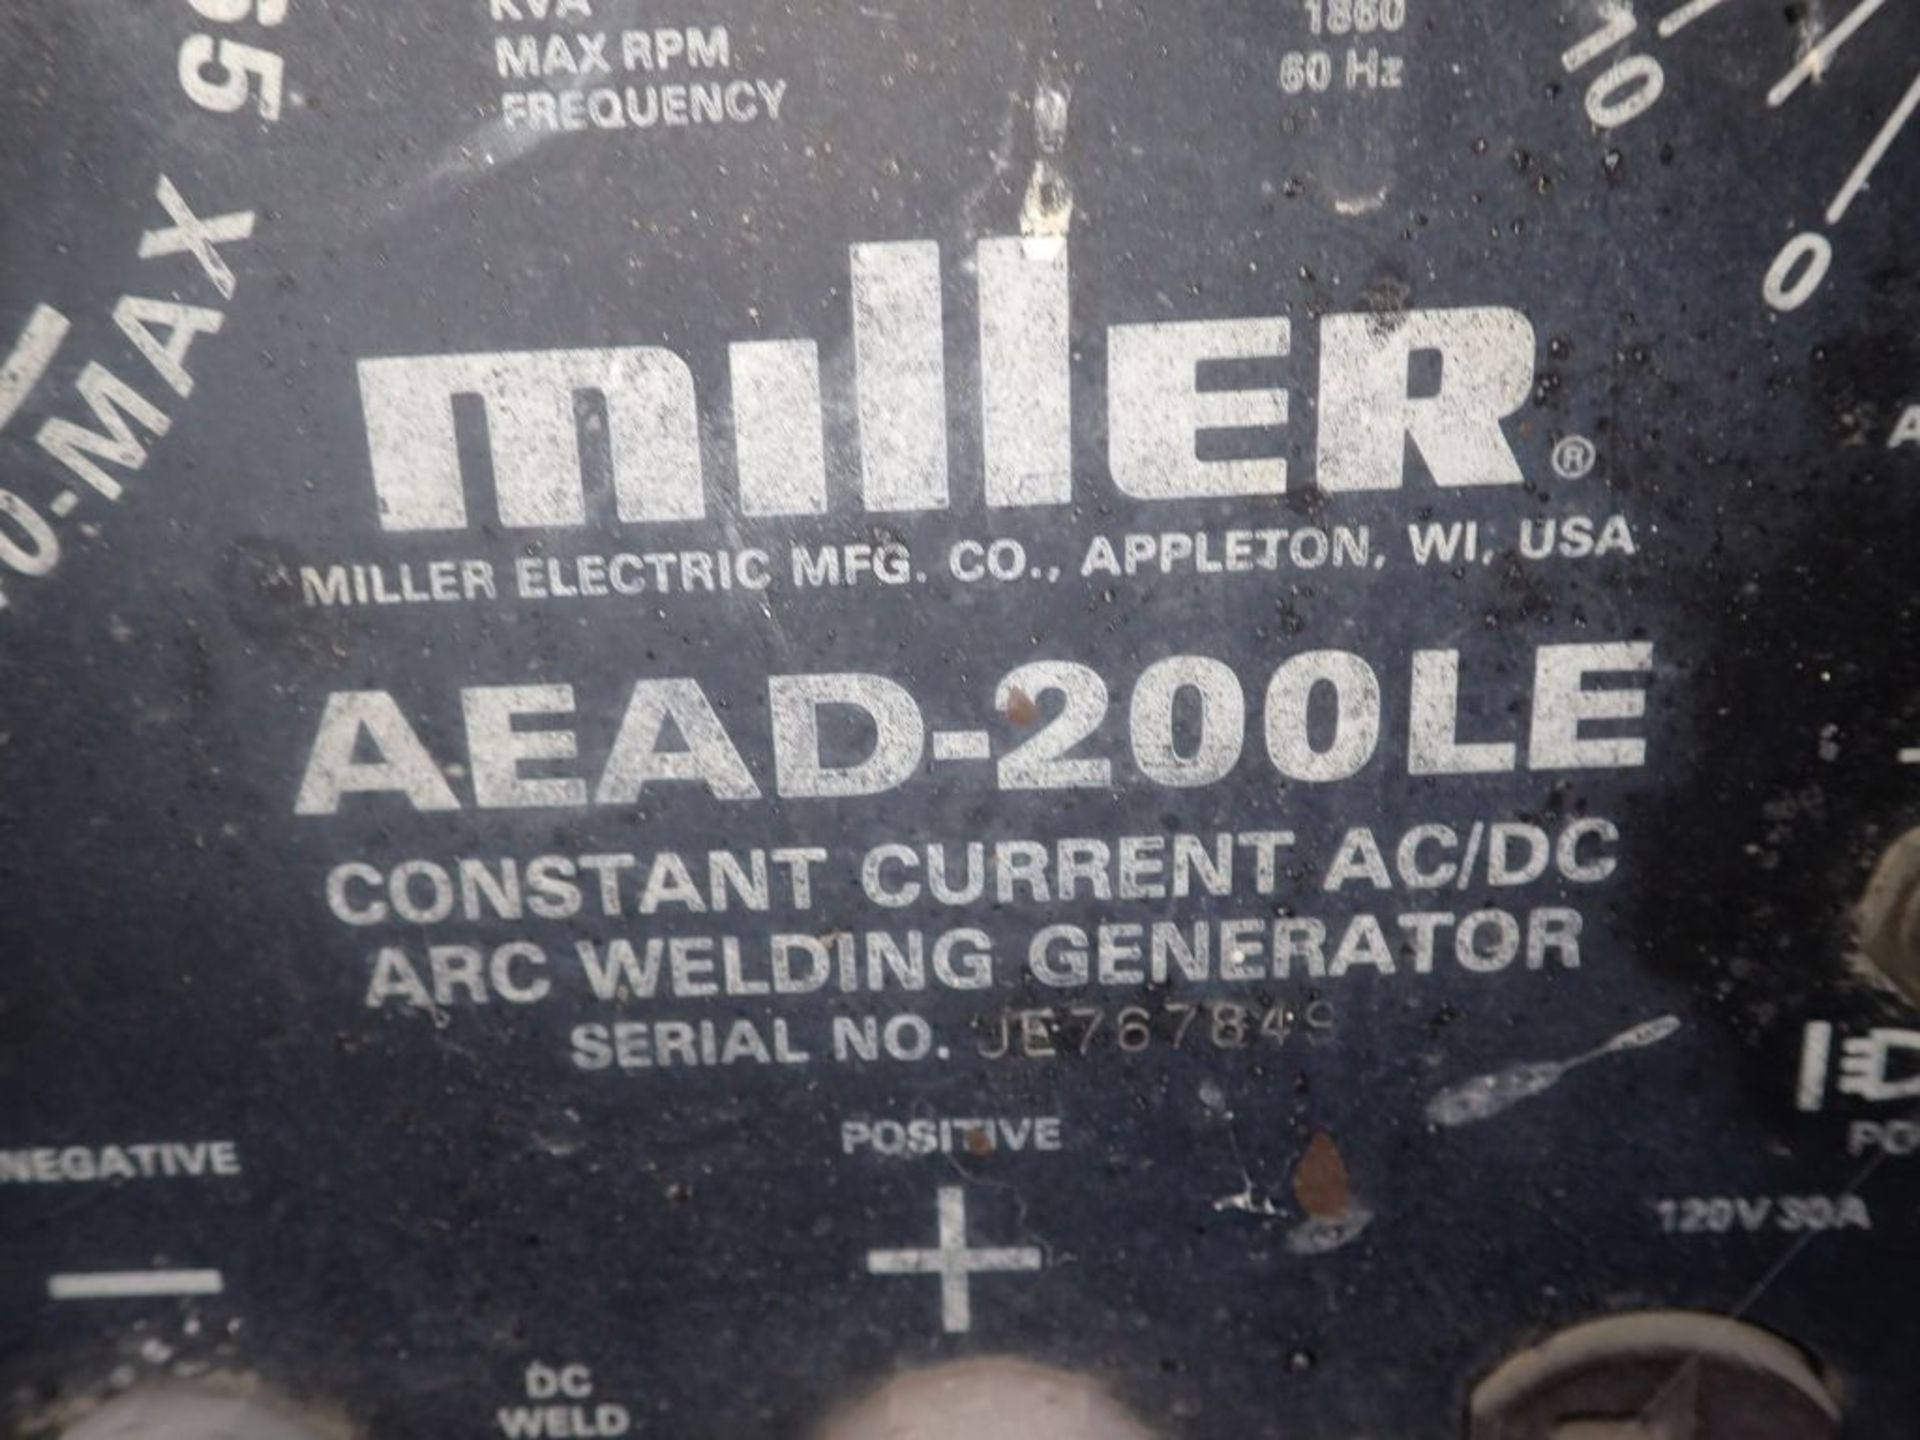 Miller Welding Generator AC/DC AEAD-200LE | Wield Output: 25V, 2000 RPM; Power Outage: 120/420V, - Image 8 of 14